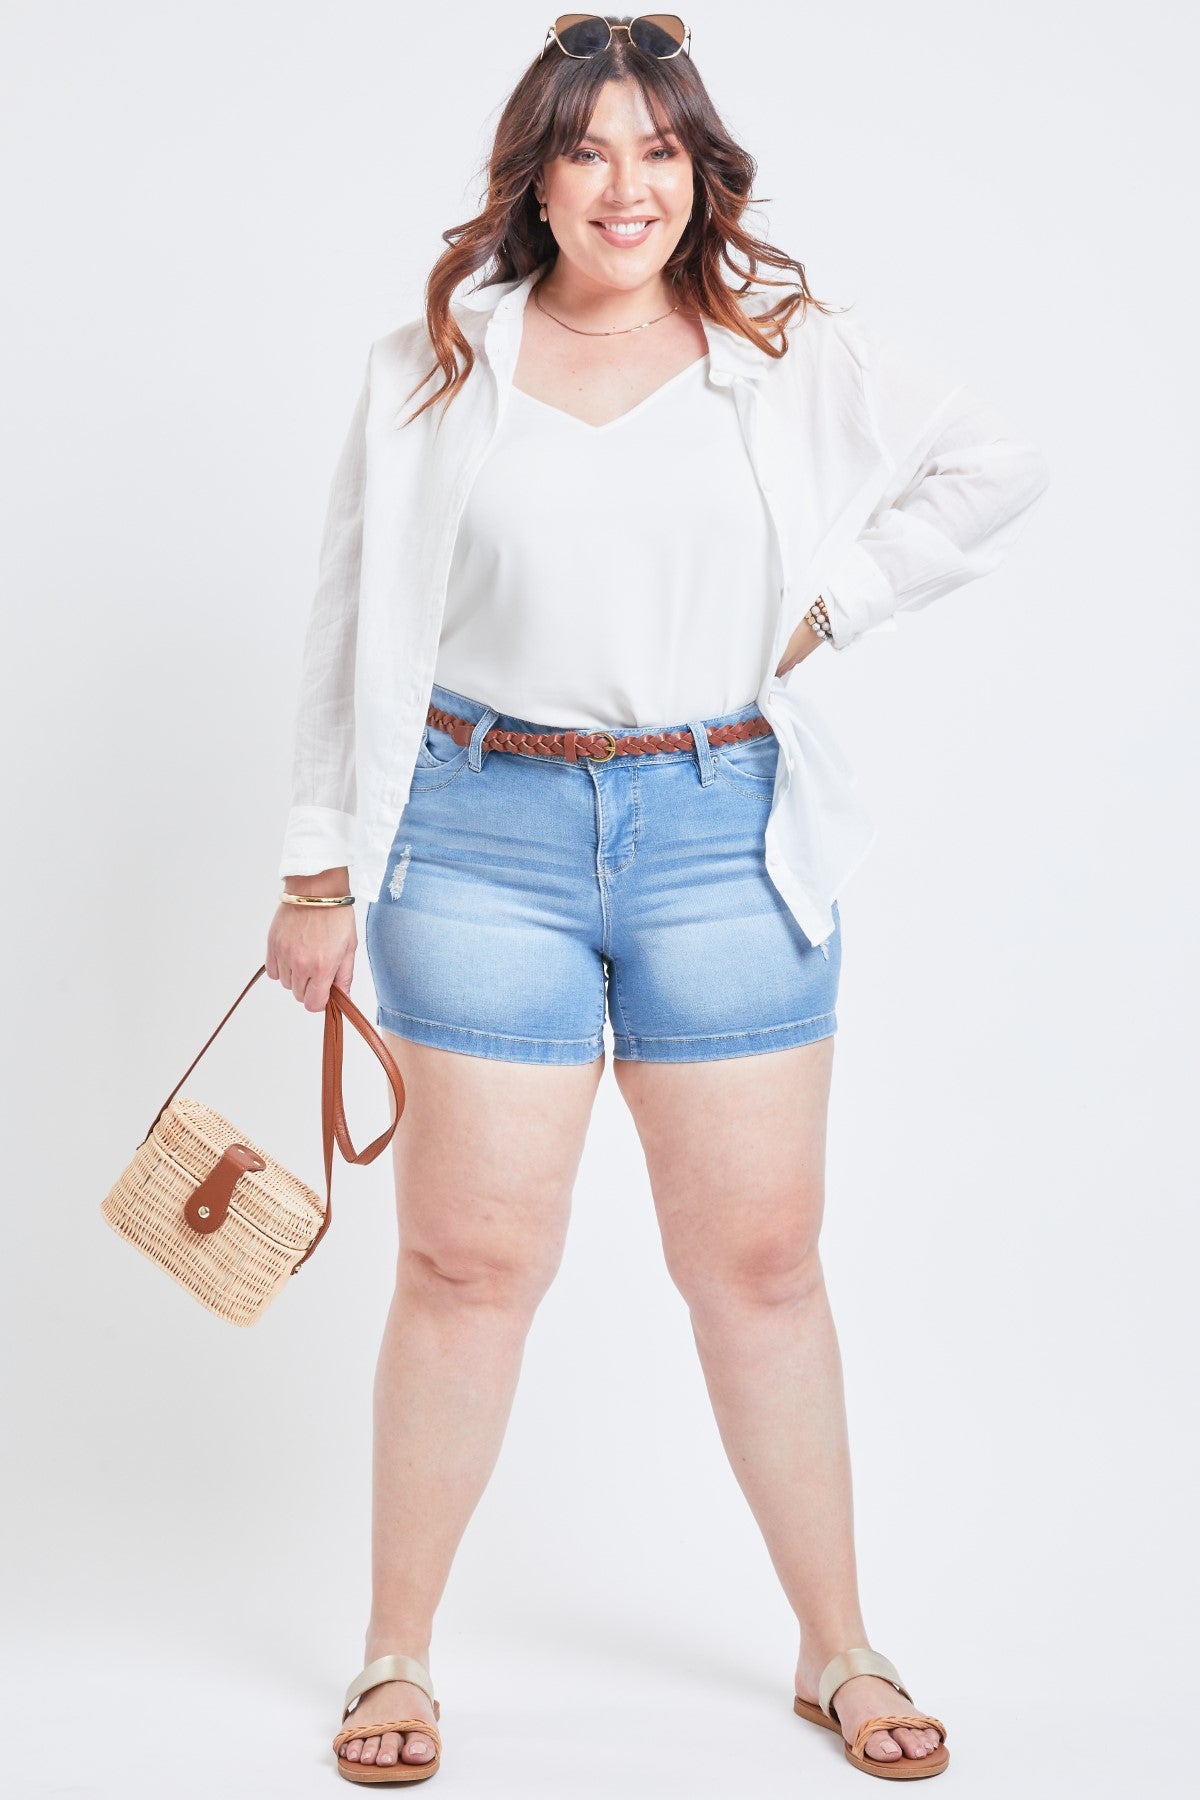 Missy Plus Size Wannabettabutt 1-Button Side Slit Hem Shorts Made With Recycled Fibers 12 Pack